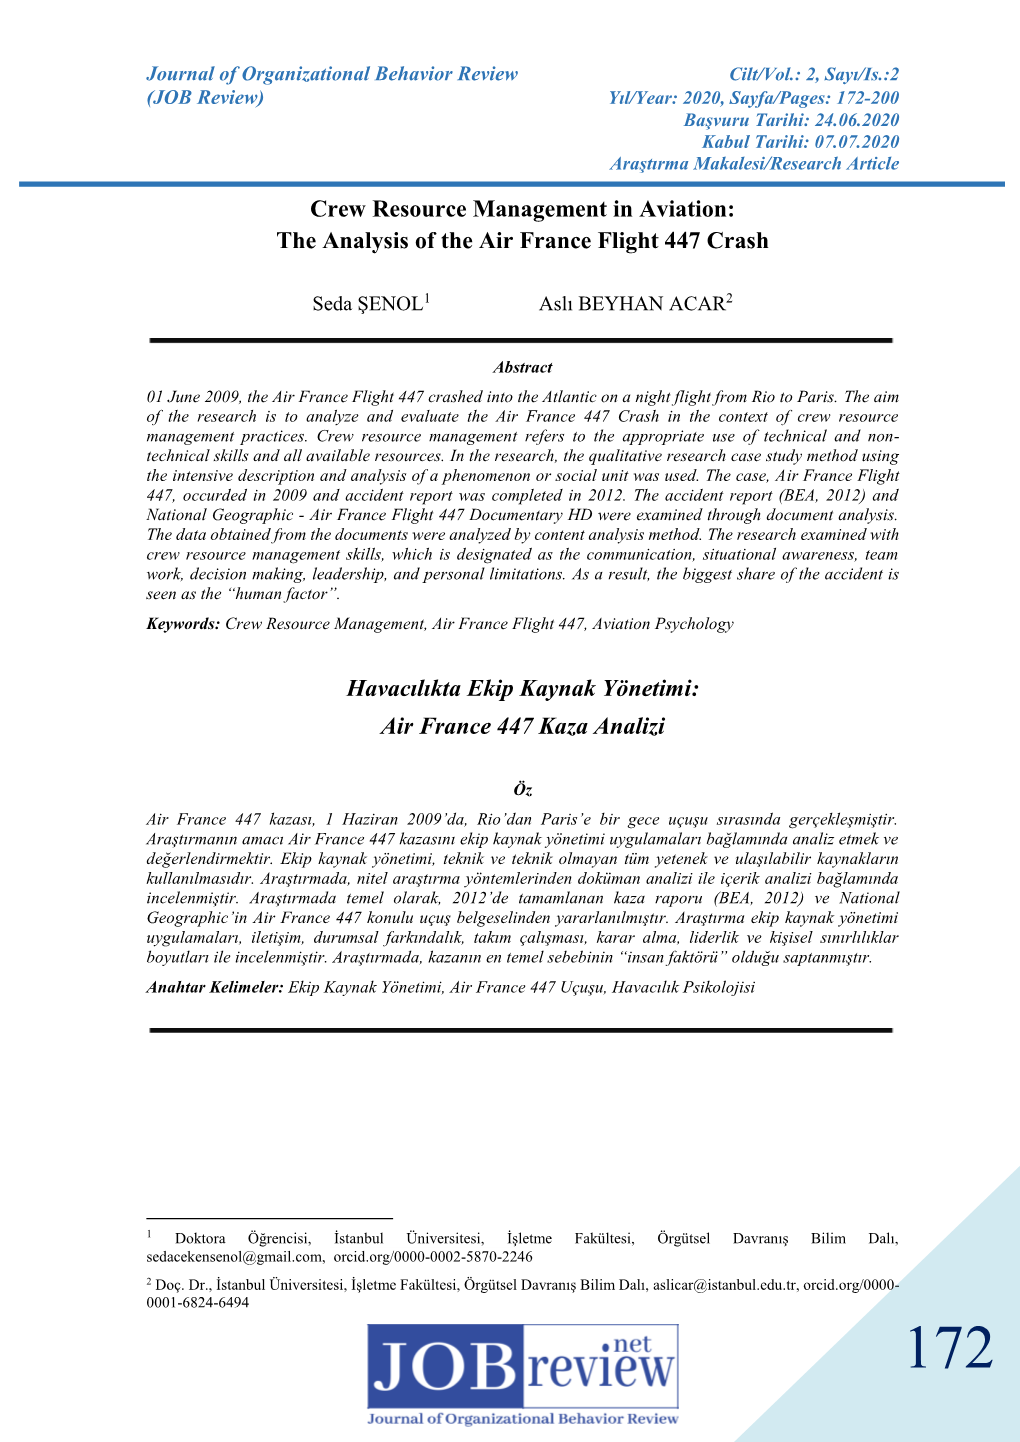 Crew Resource Management in Aviation: the Analysis of the Air France Flight 447 Crash